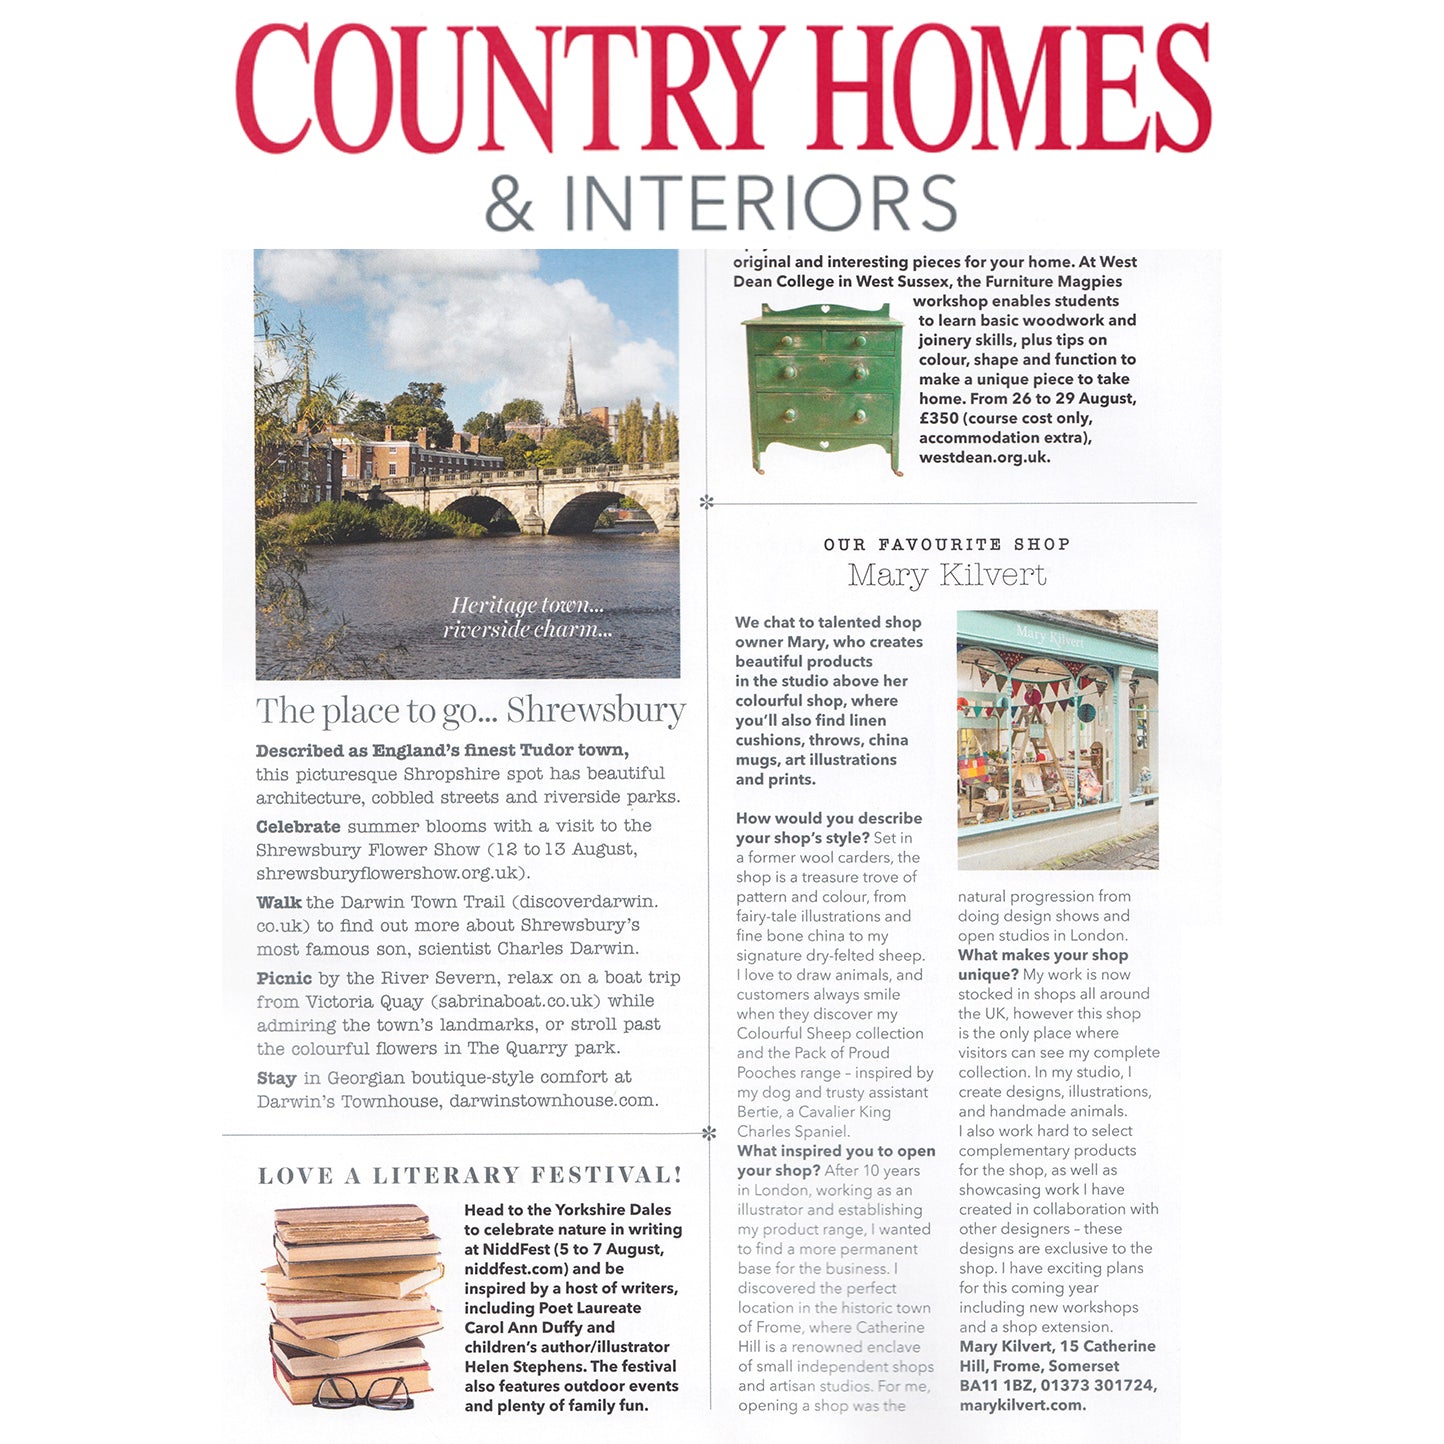 Mary Kilvert's Shop featured in Country Homes & Interiors